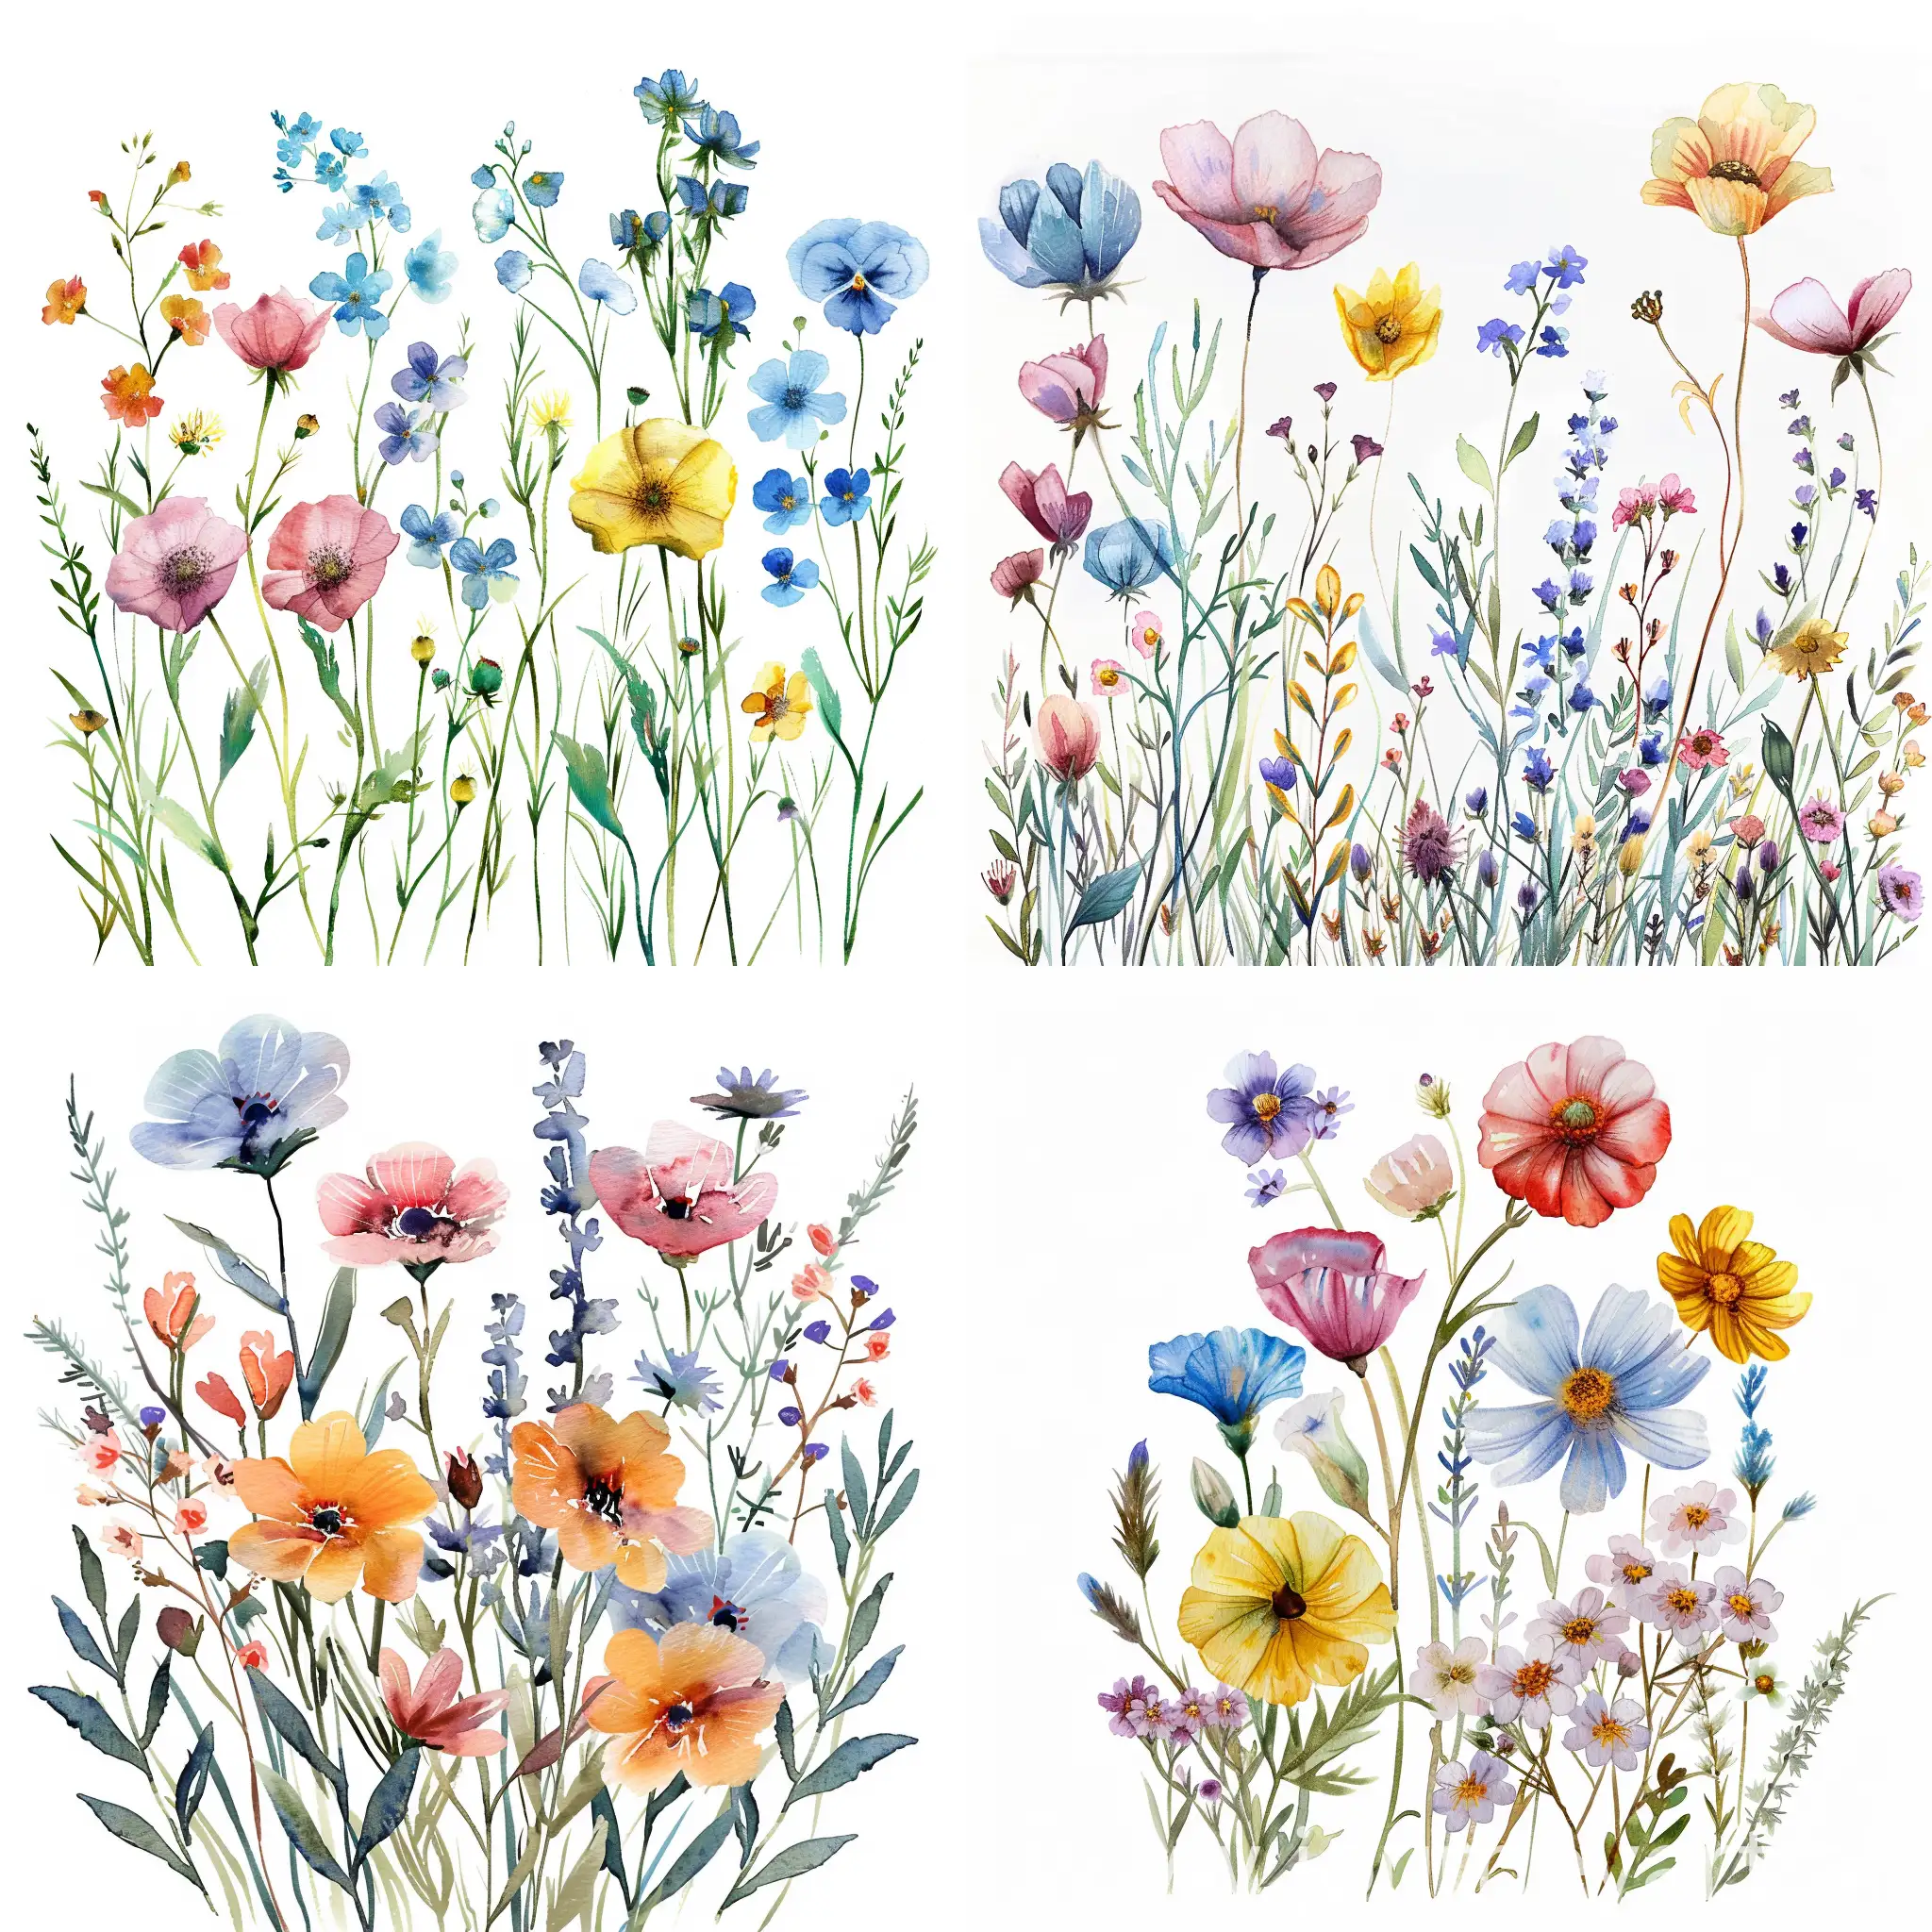 watercolor wildflowers, soft handpainting, on white background